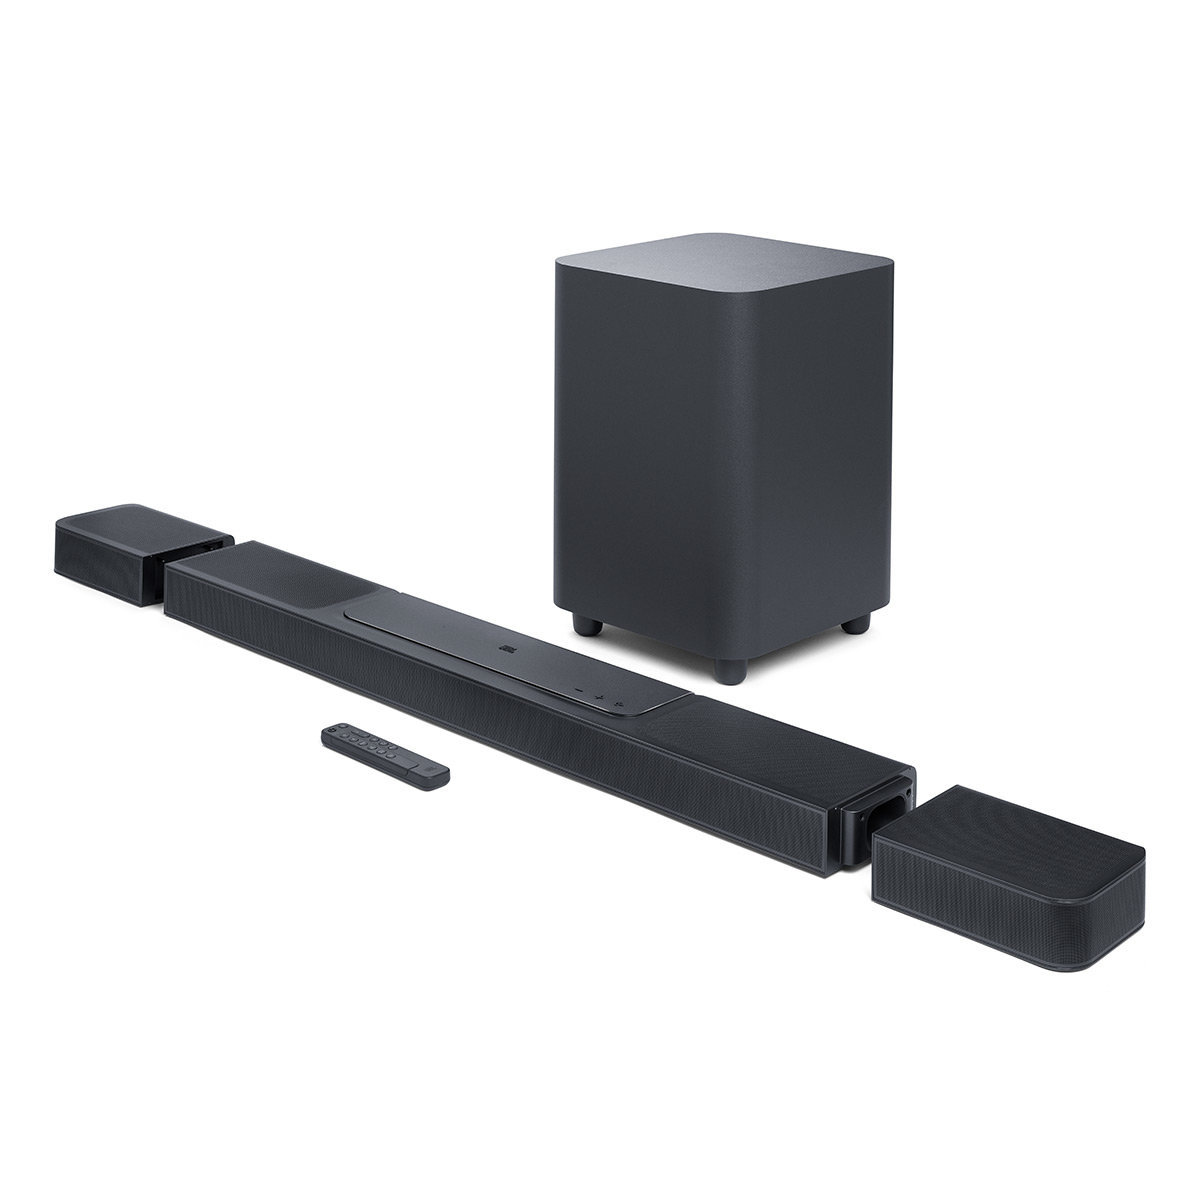 JBL Bar 1300X Pro 11.1.4 Soundbar with 12" Wireless Subwoofer; Detachable Rear Speakers, MultiBeam Surround Sound, Dolby Atmos, & DTS:X